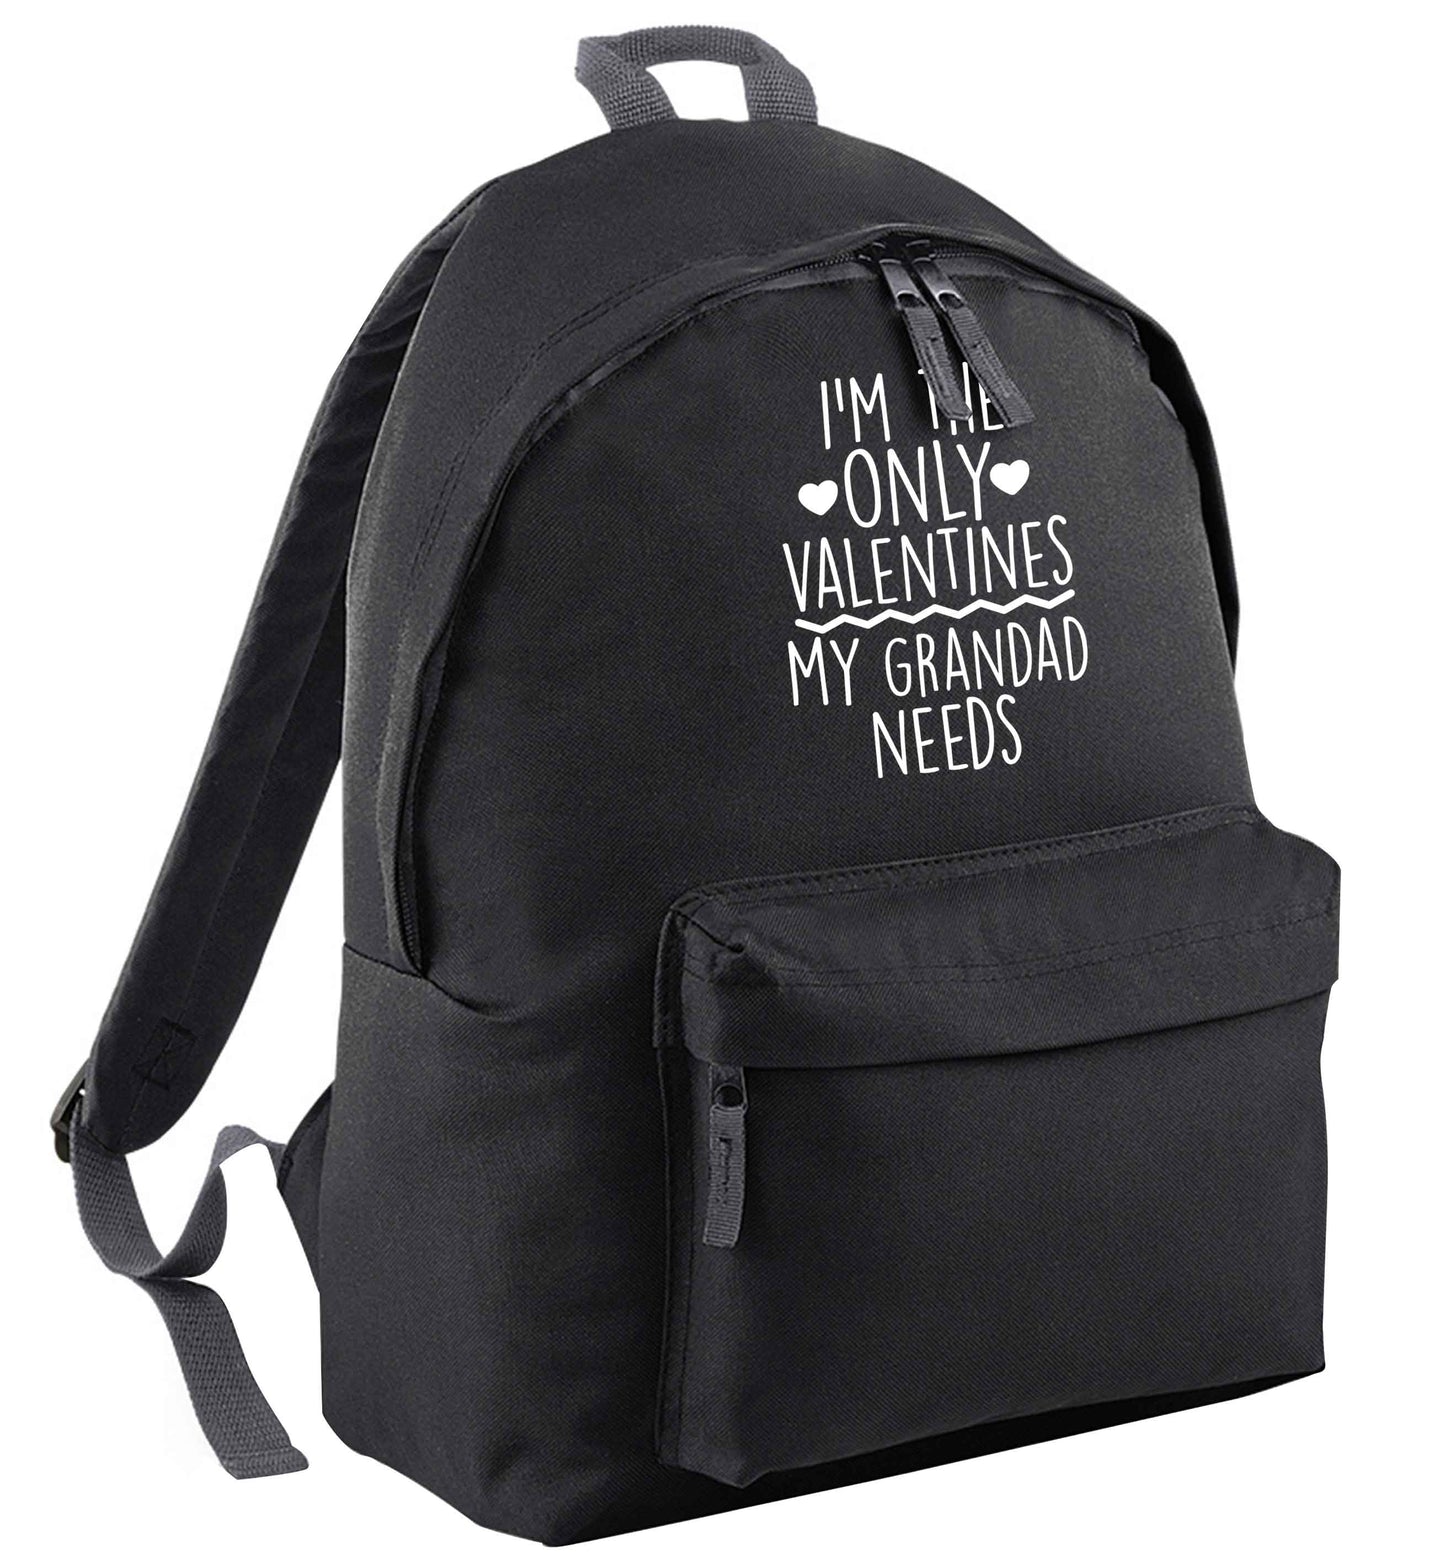 I'm the only valentines my grandad needs | Children's backpack